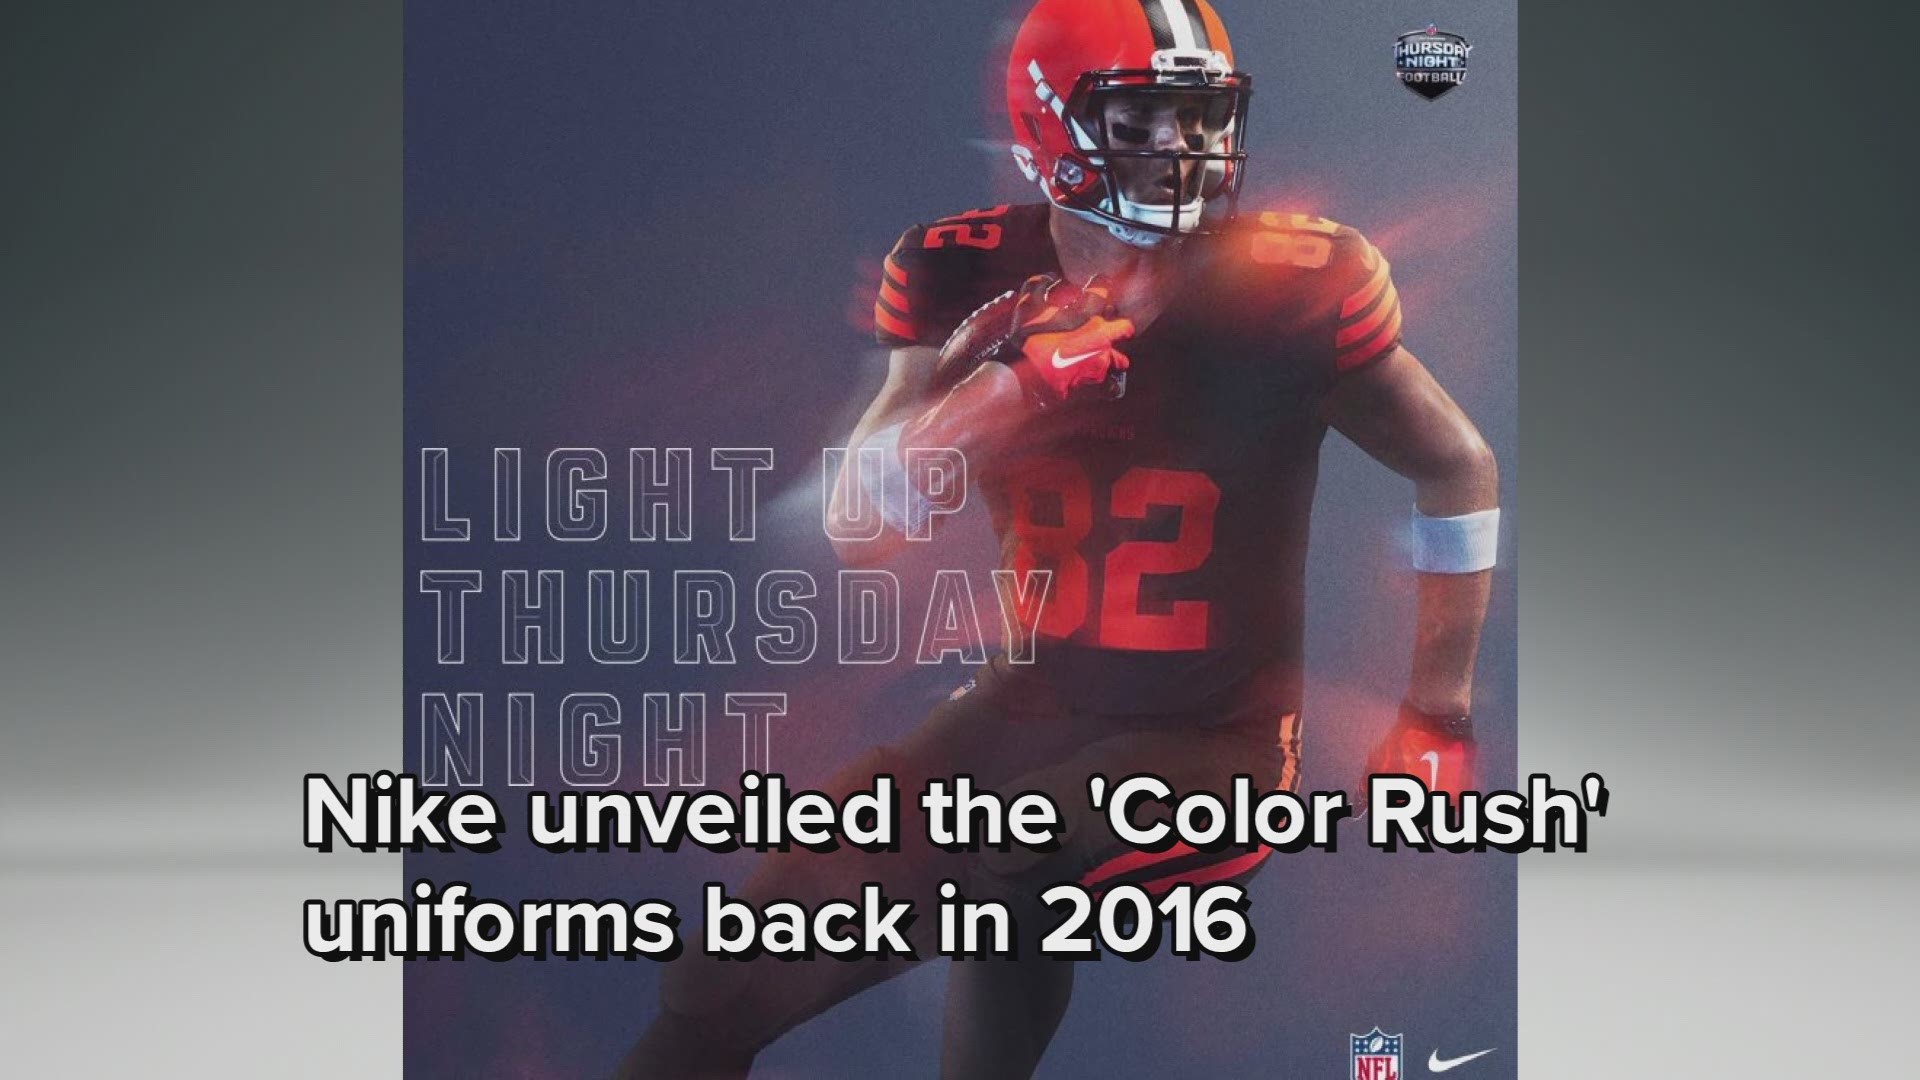 Cleveland Browns to wear 'Color Rush' uniforms multiple times in 2018